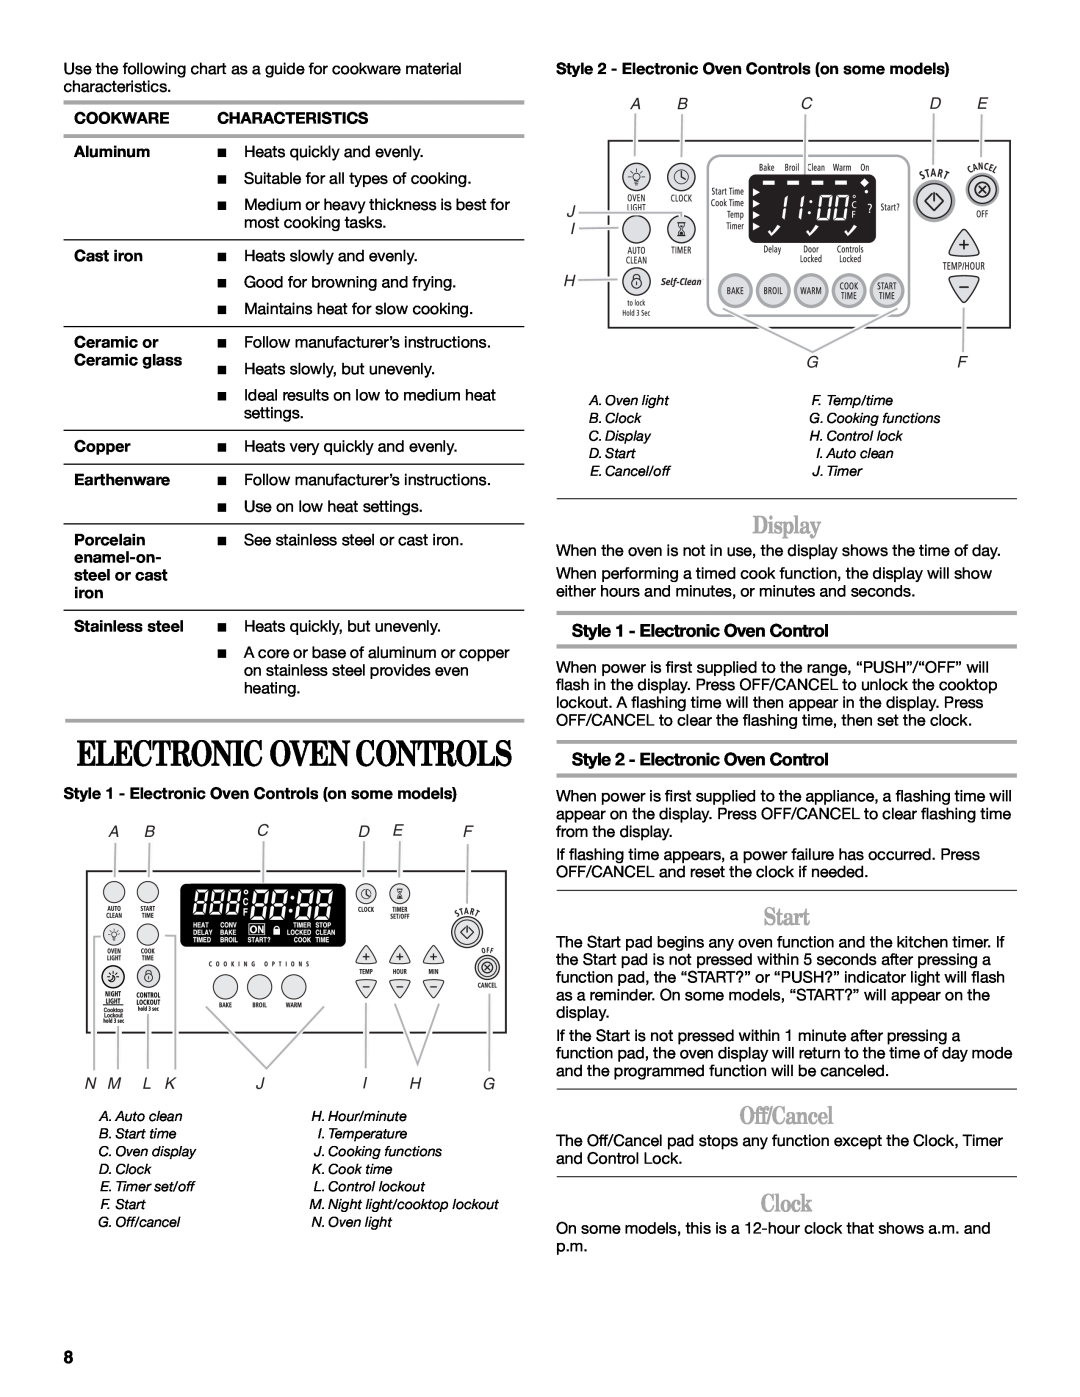 Whirlpool W10110368 manual Display, Start, Off/Cancel, Clock, Electronic Oven Controls, Style 1 - Electronic Oven Control 